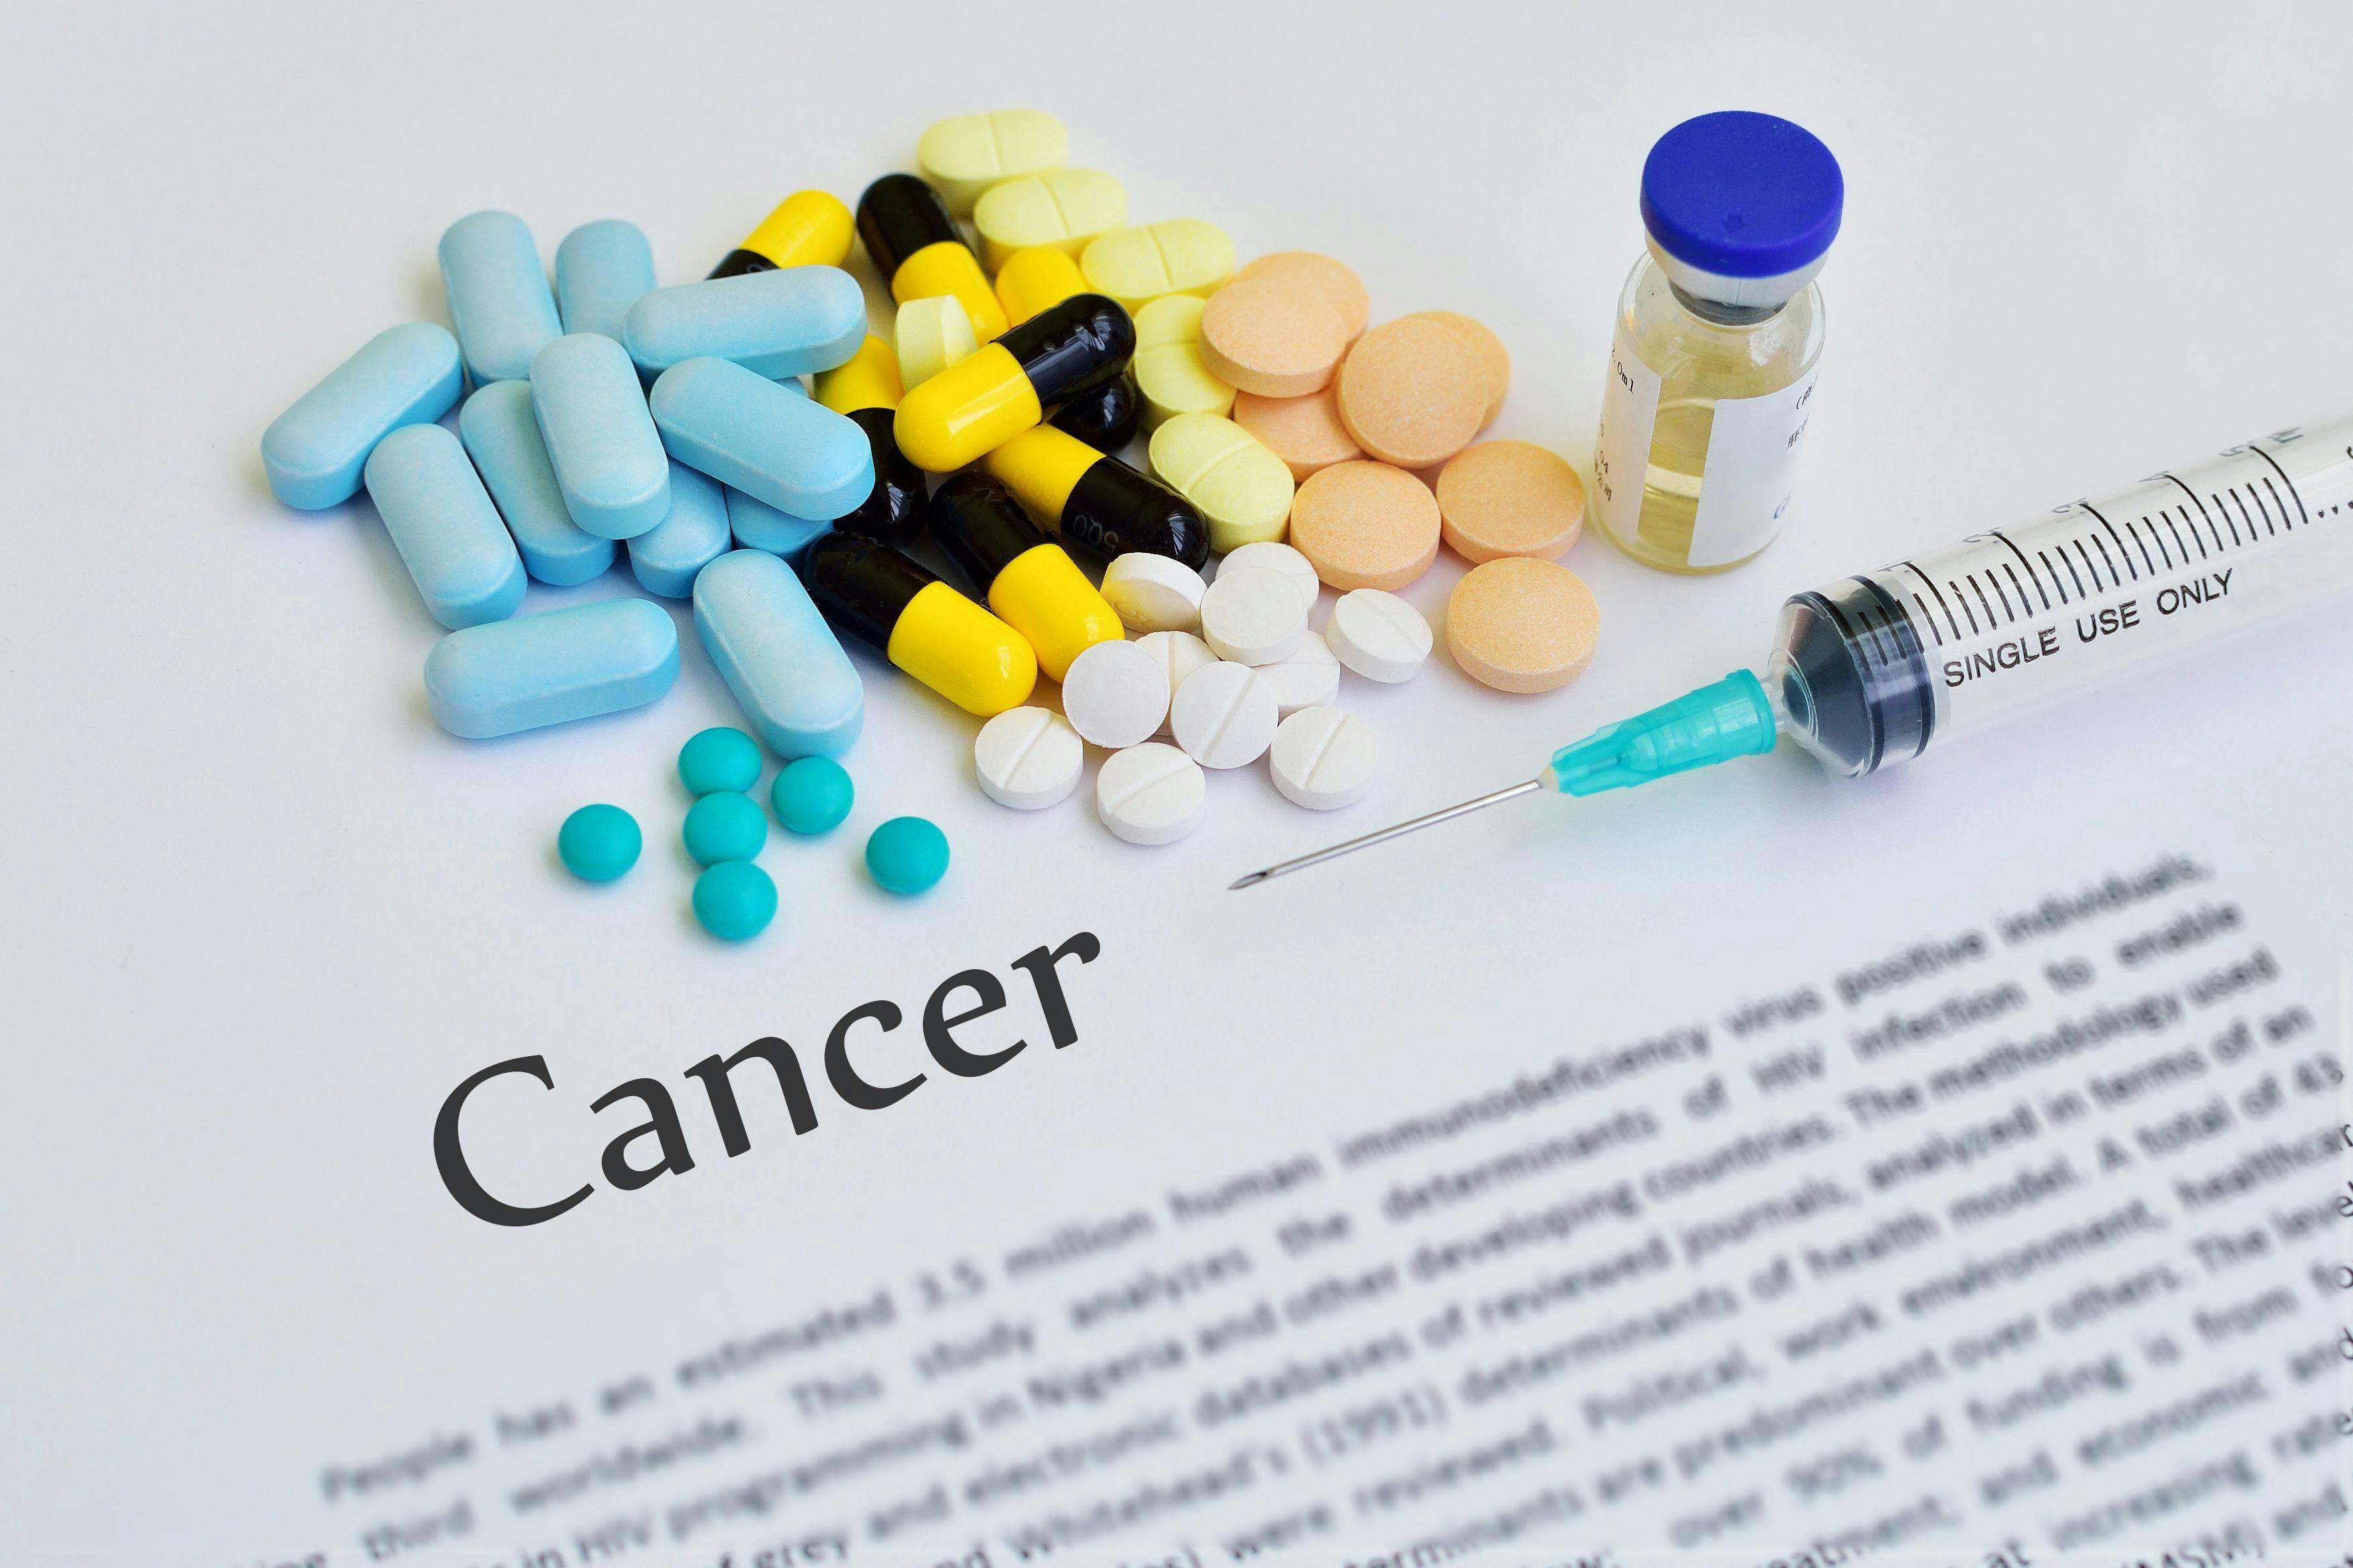 How Pharmacists Can Help Address Ongoing Delays in Cancer Screenings